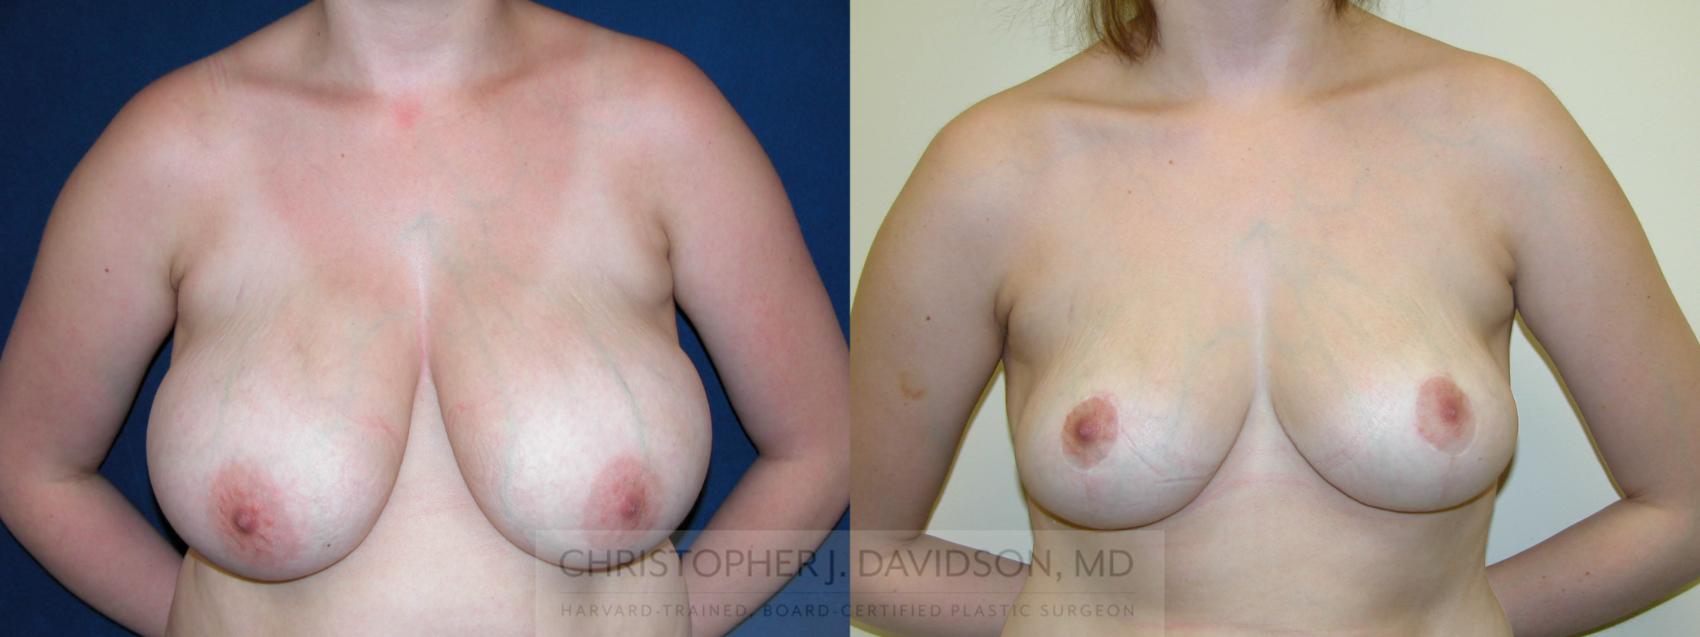 Breast Lift Case 125 Before & After View #1 | Wellesley, MA | Christopher J. Davidson, MD